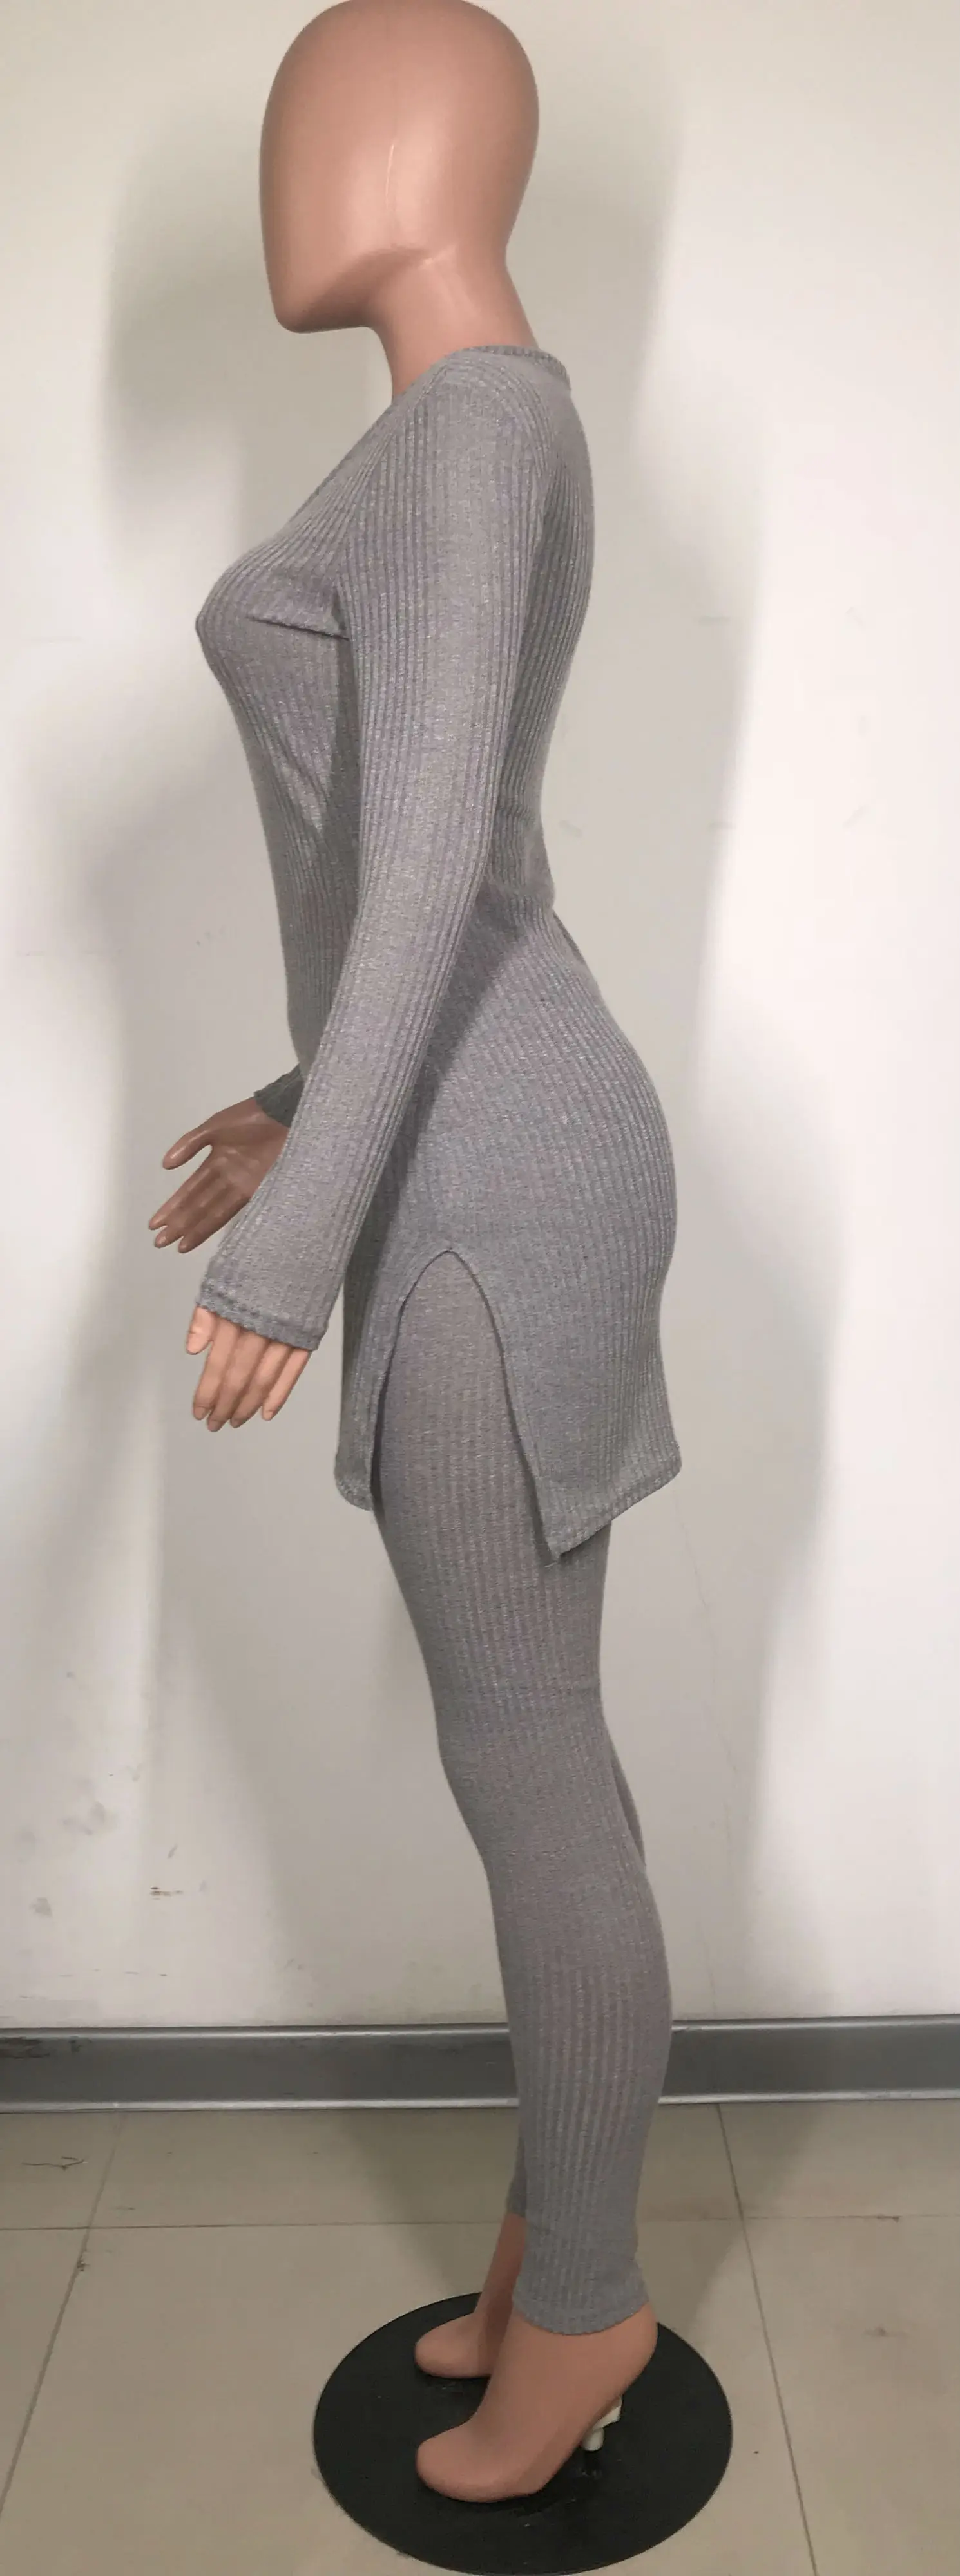 2 Two Piece Set Women Clothes Autumn Winter Outfits Long Sleeve Knit Sweater Tops+Bodycon Shorts Suit Sexy Matching Sets